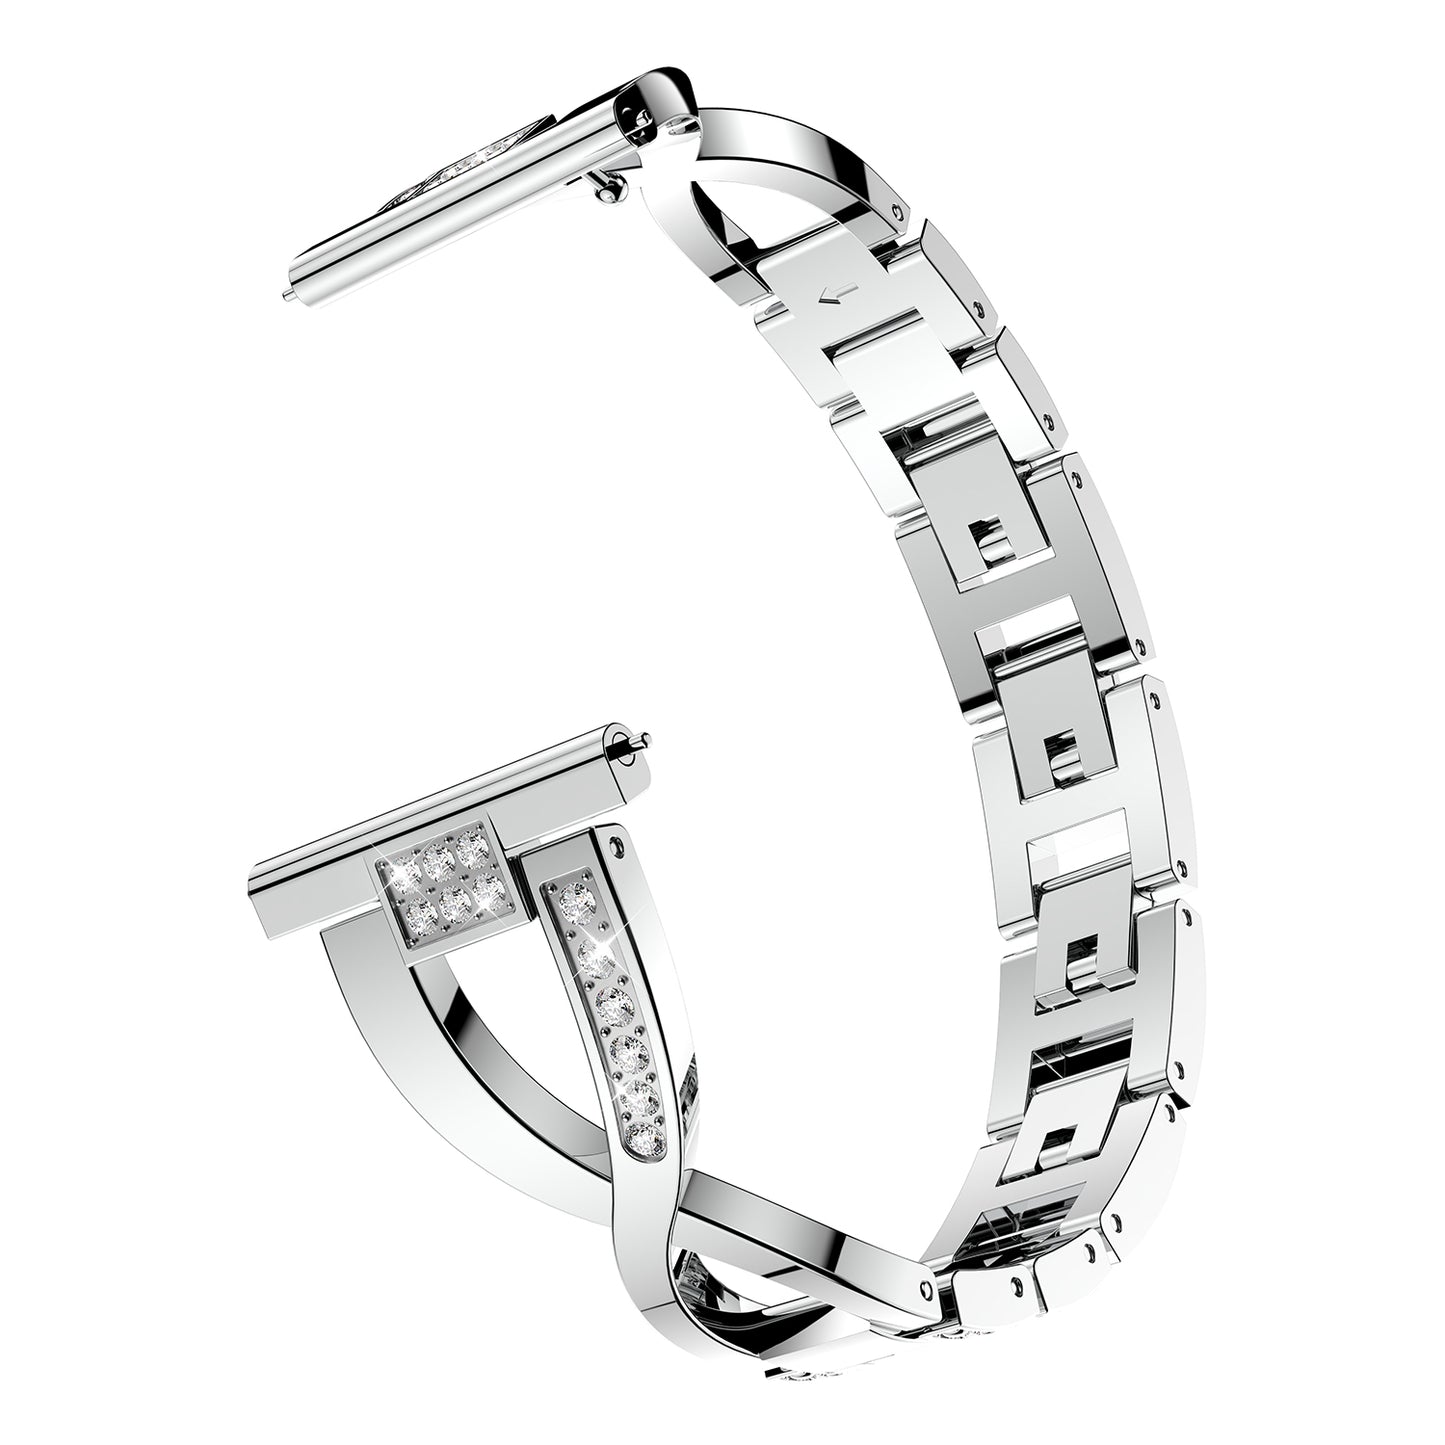 Alloy Bracelet w/ Rhinestones for Fitbit Charge 3 & Charge 4